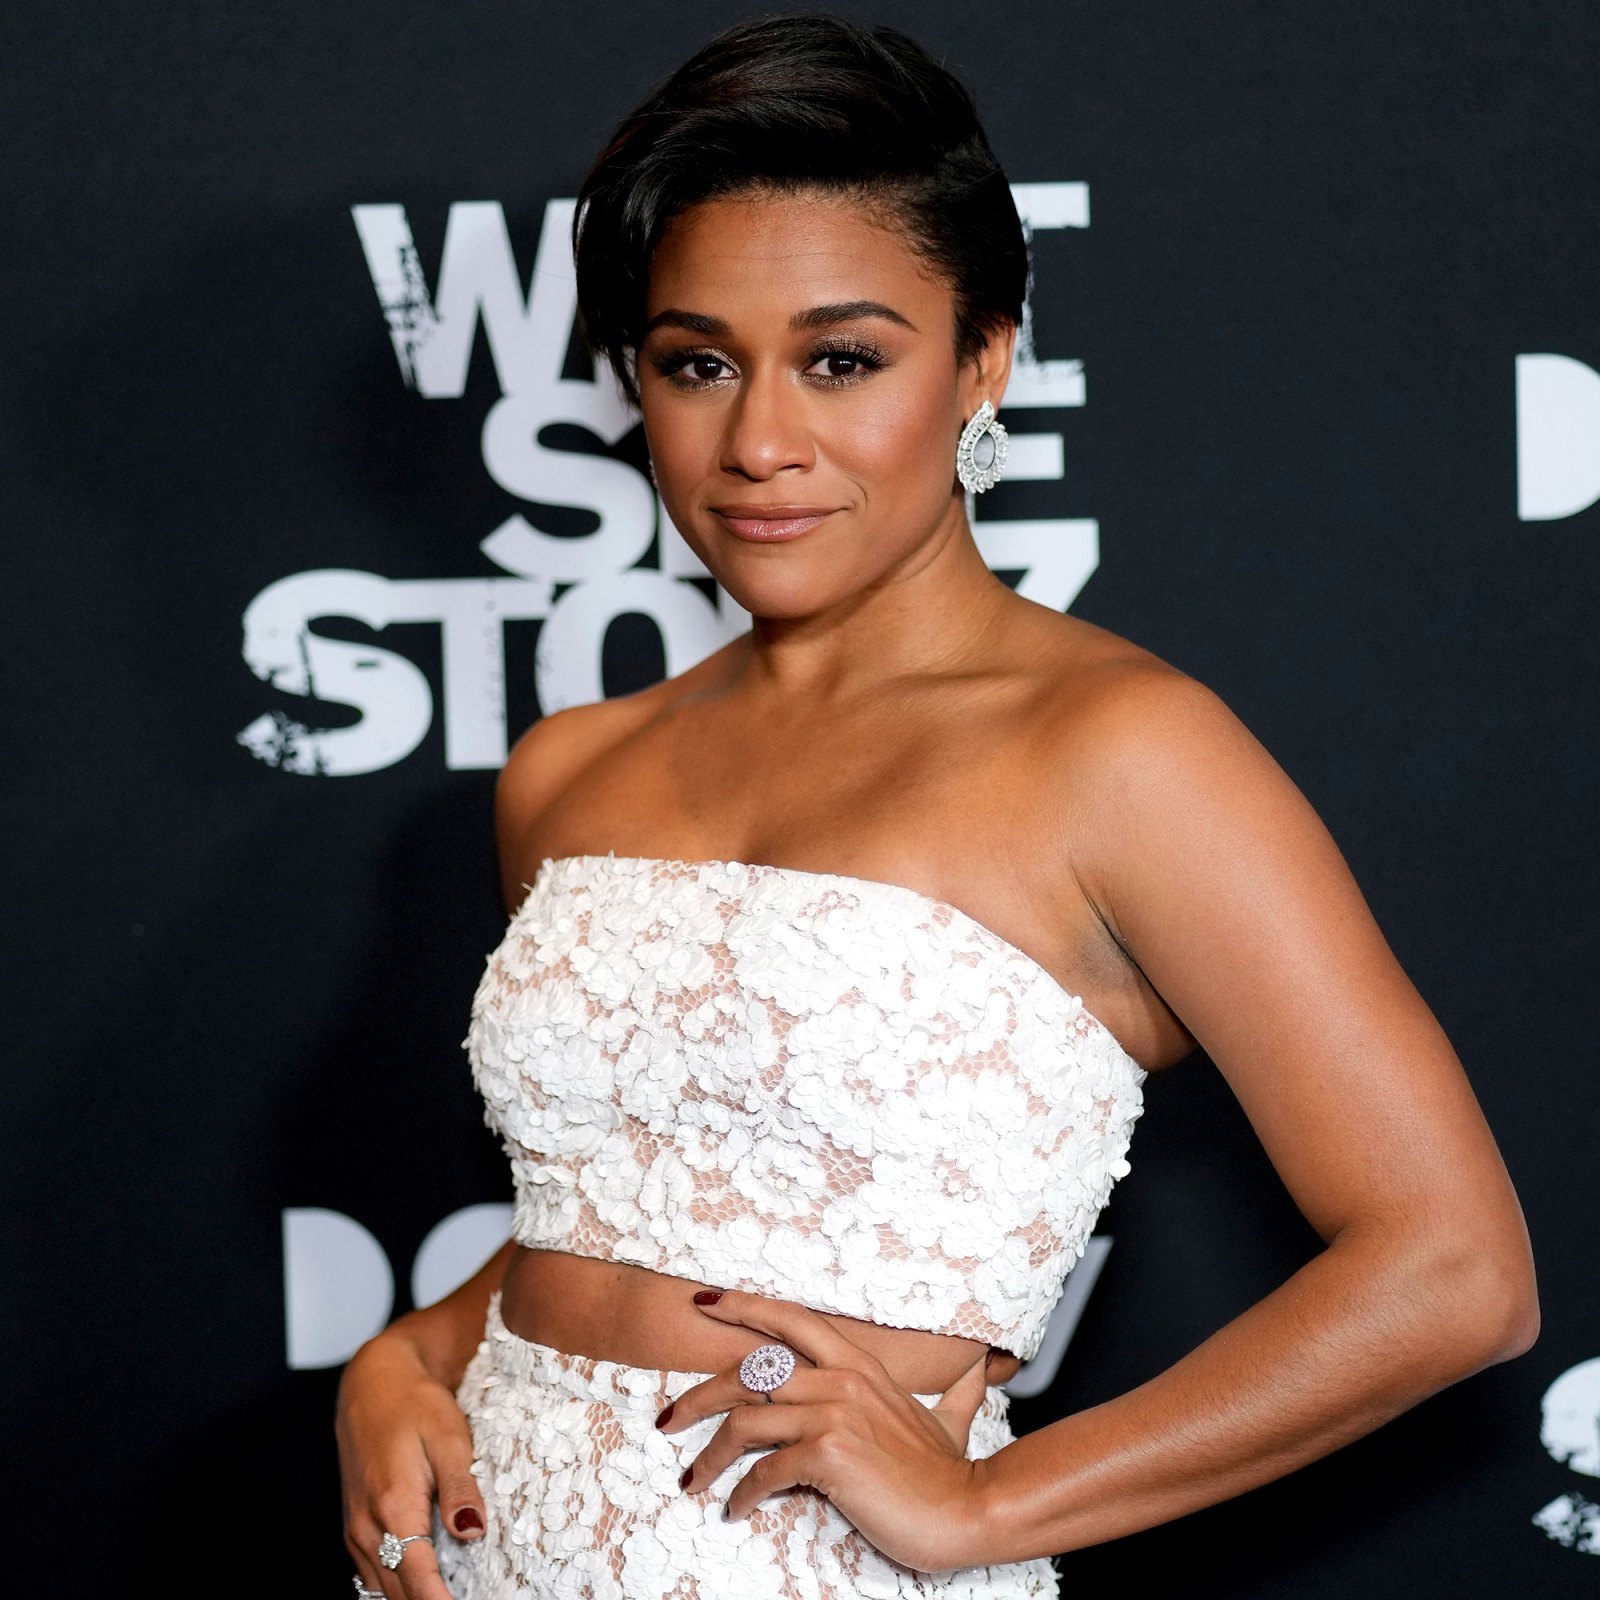 Ariana DeBose’s West Side Story Controversy: Here's What We Know